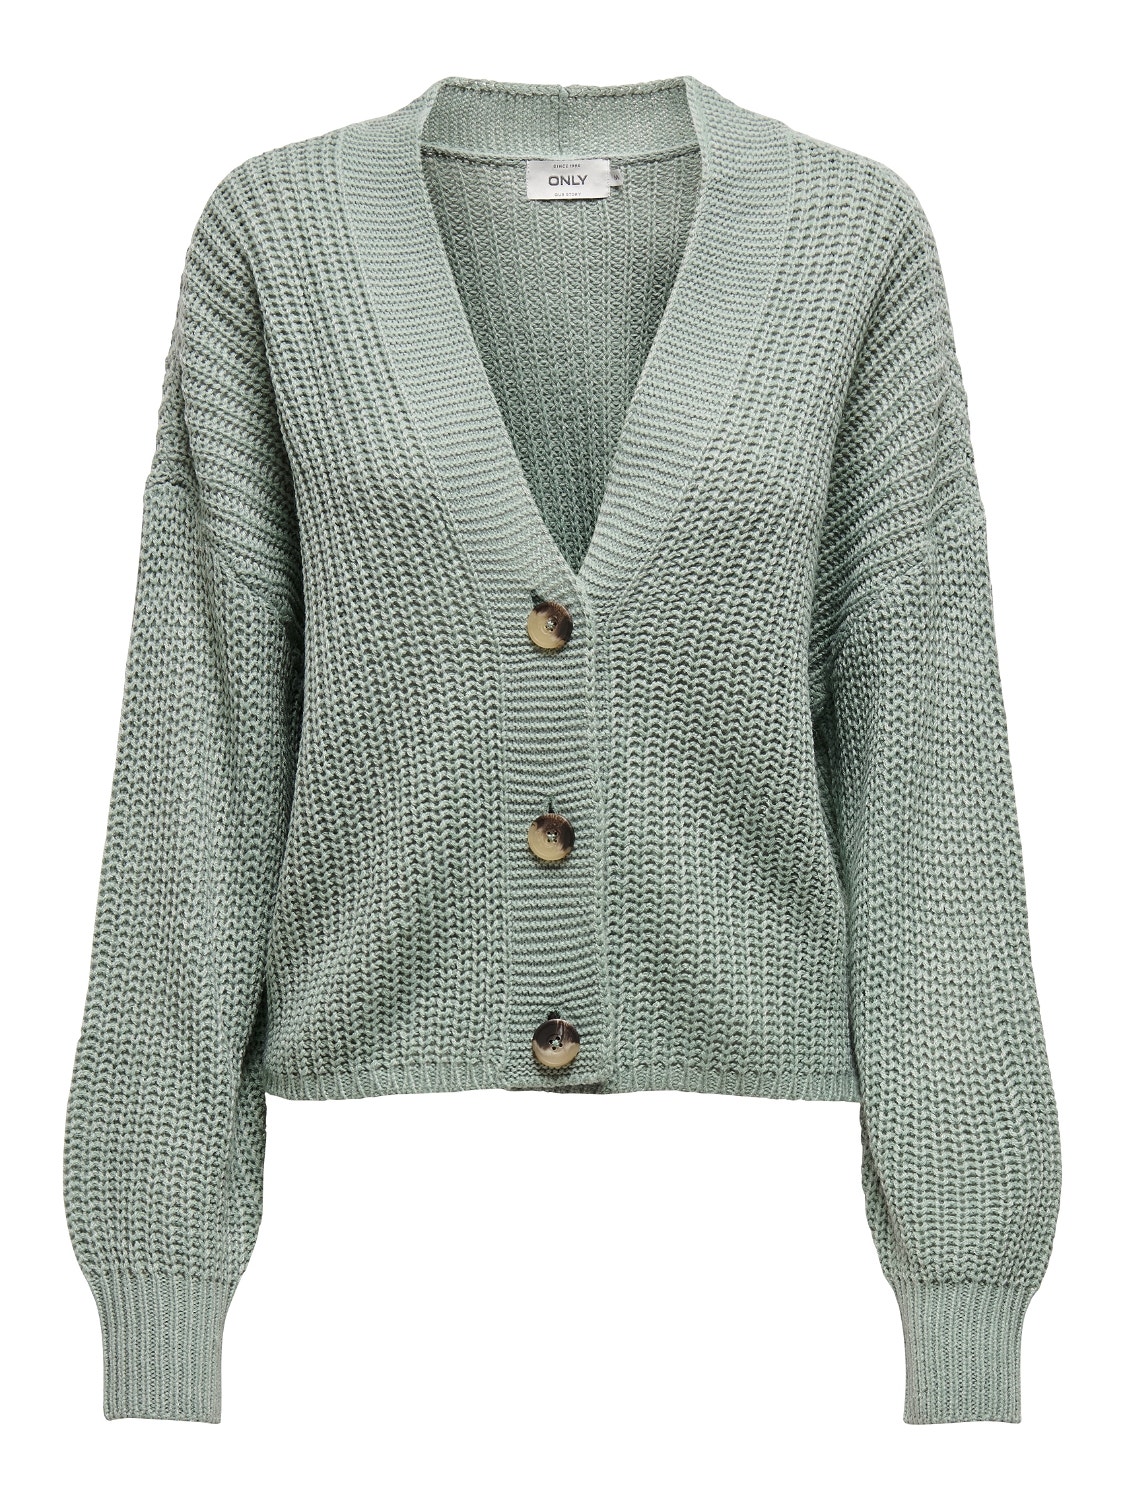 ONLY Regular Fit V-Neck Ribbed cuffs Dropped shoulders Knit Cardigan -Chinois Green - 15211521